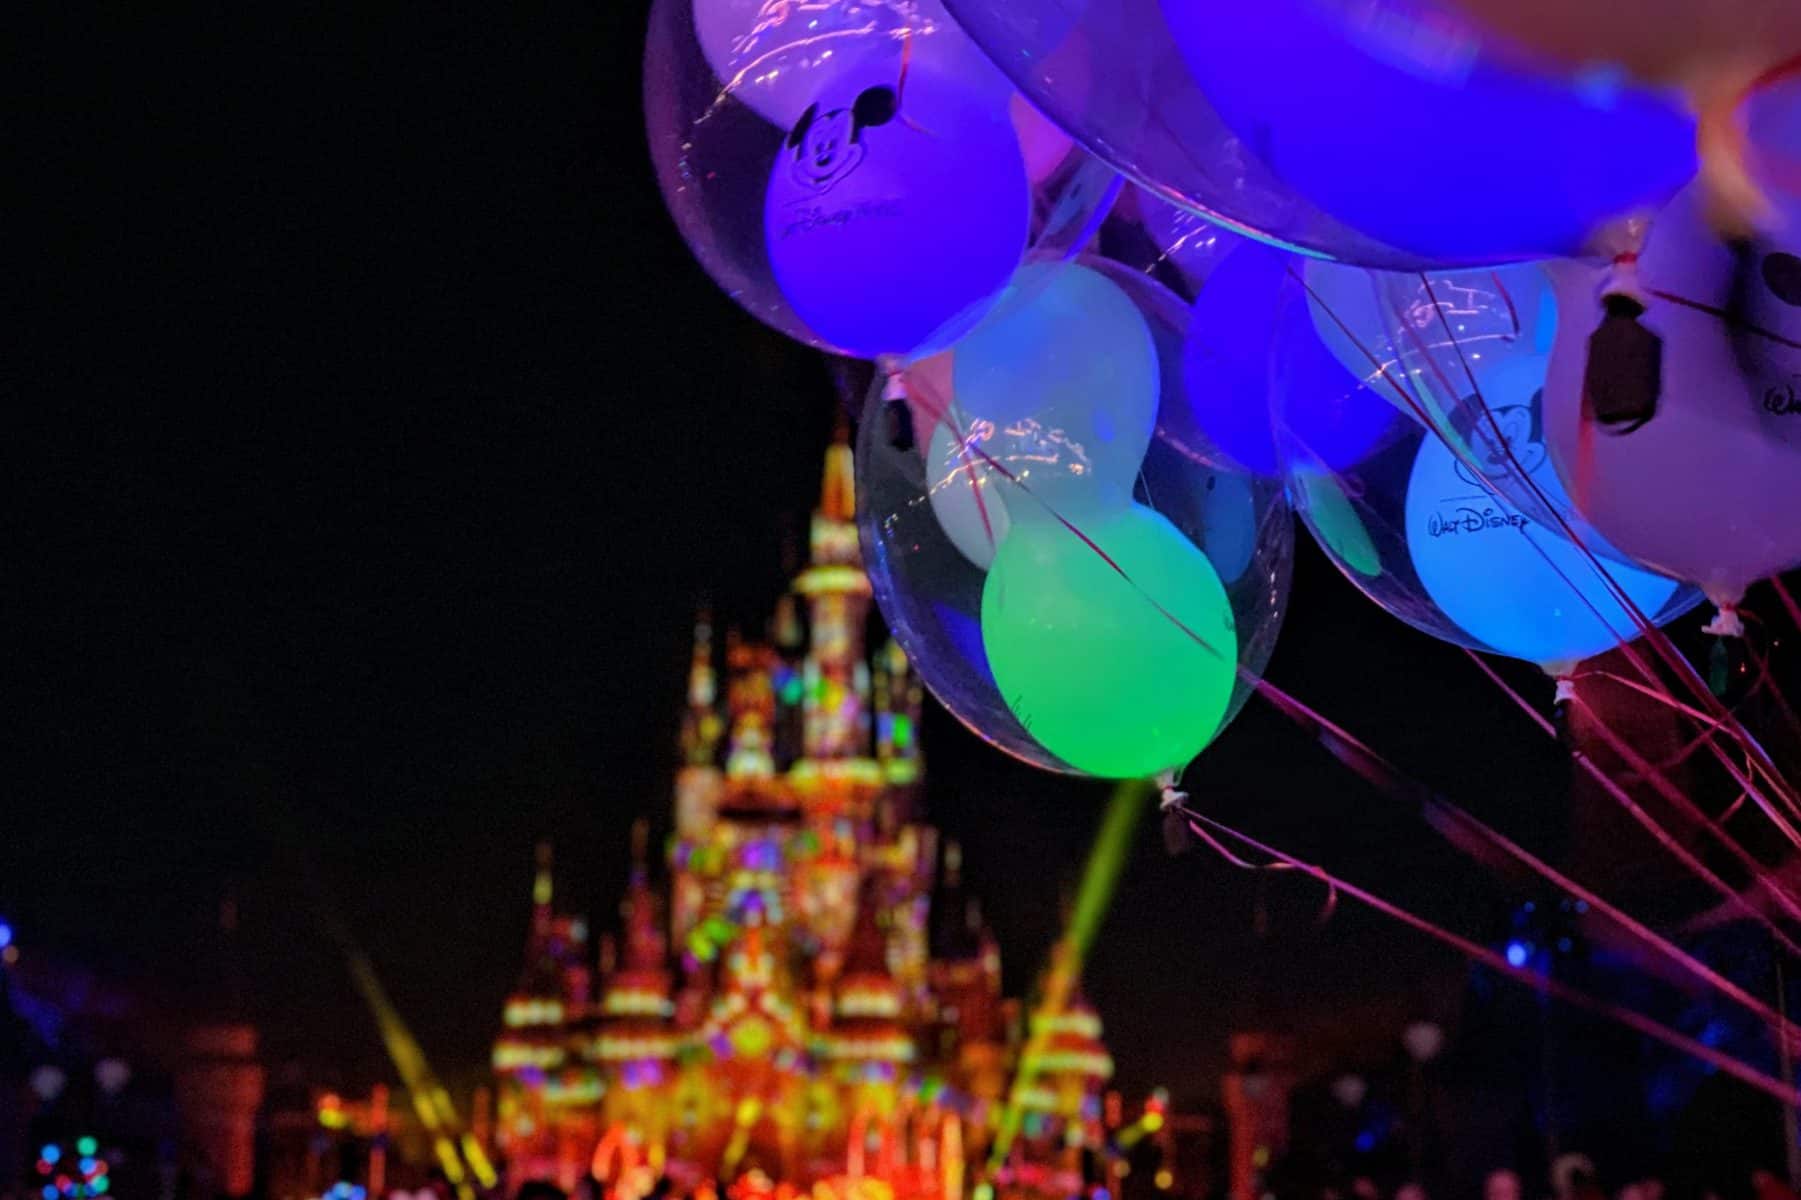 2021 Guide to the Holidays at Disney World